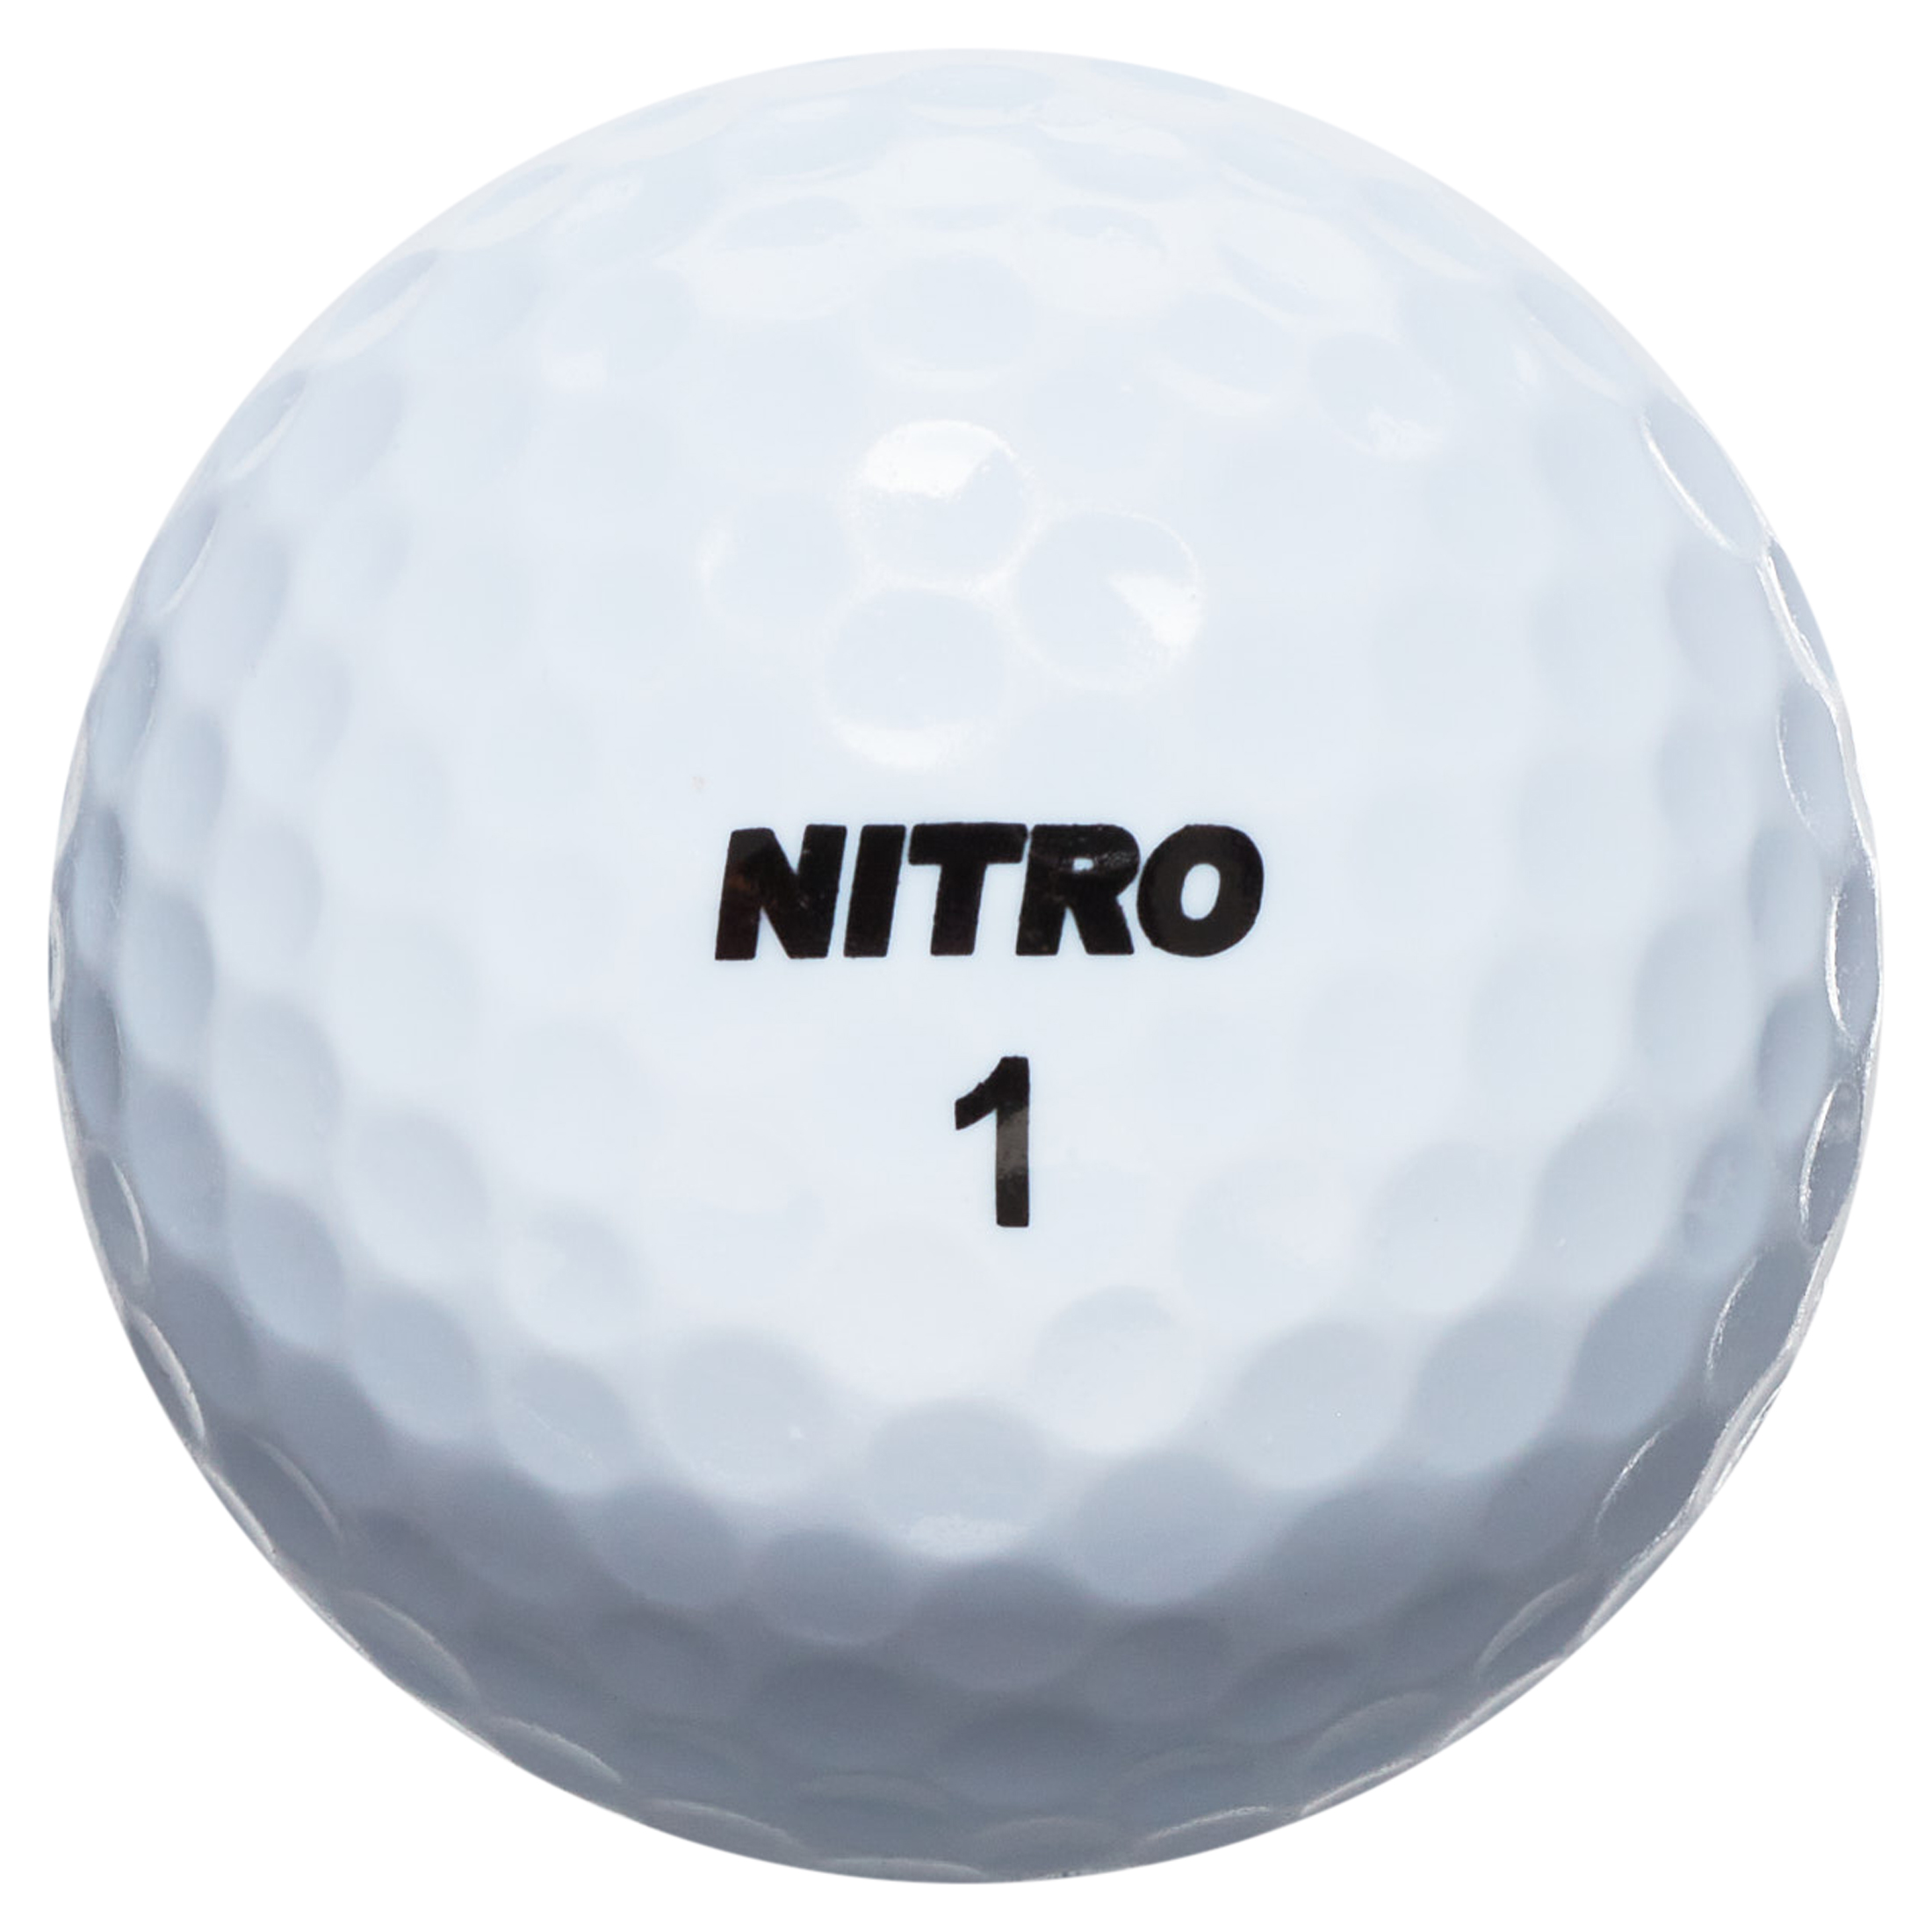 Nitro Golf Ultimate Distance Golf Balls, White, 45 Pack - image 2 of 4